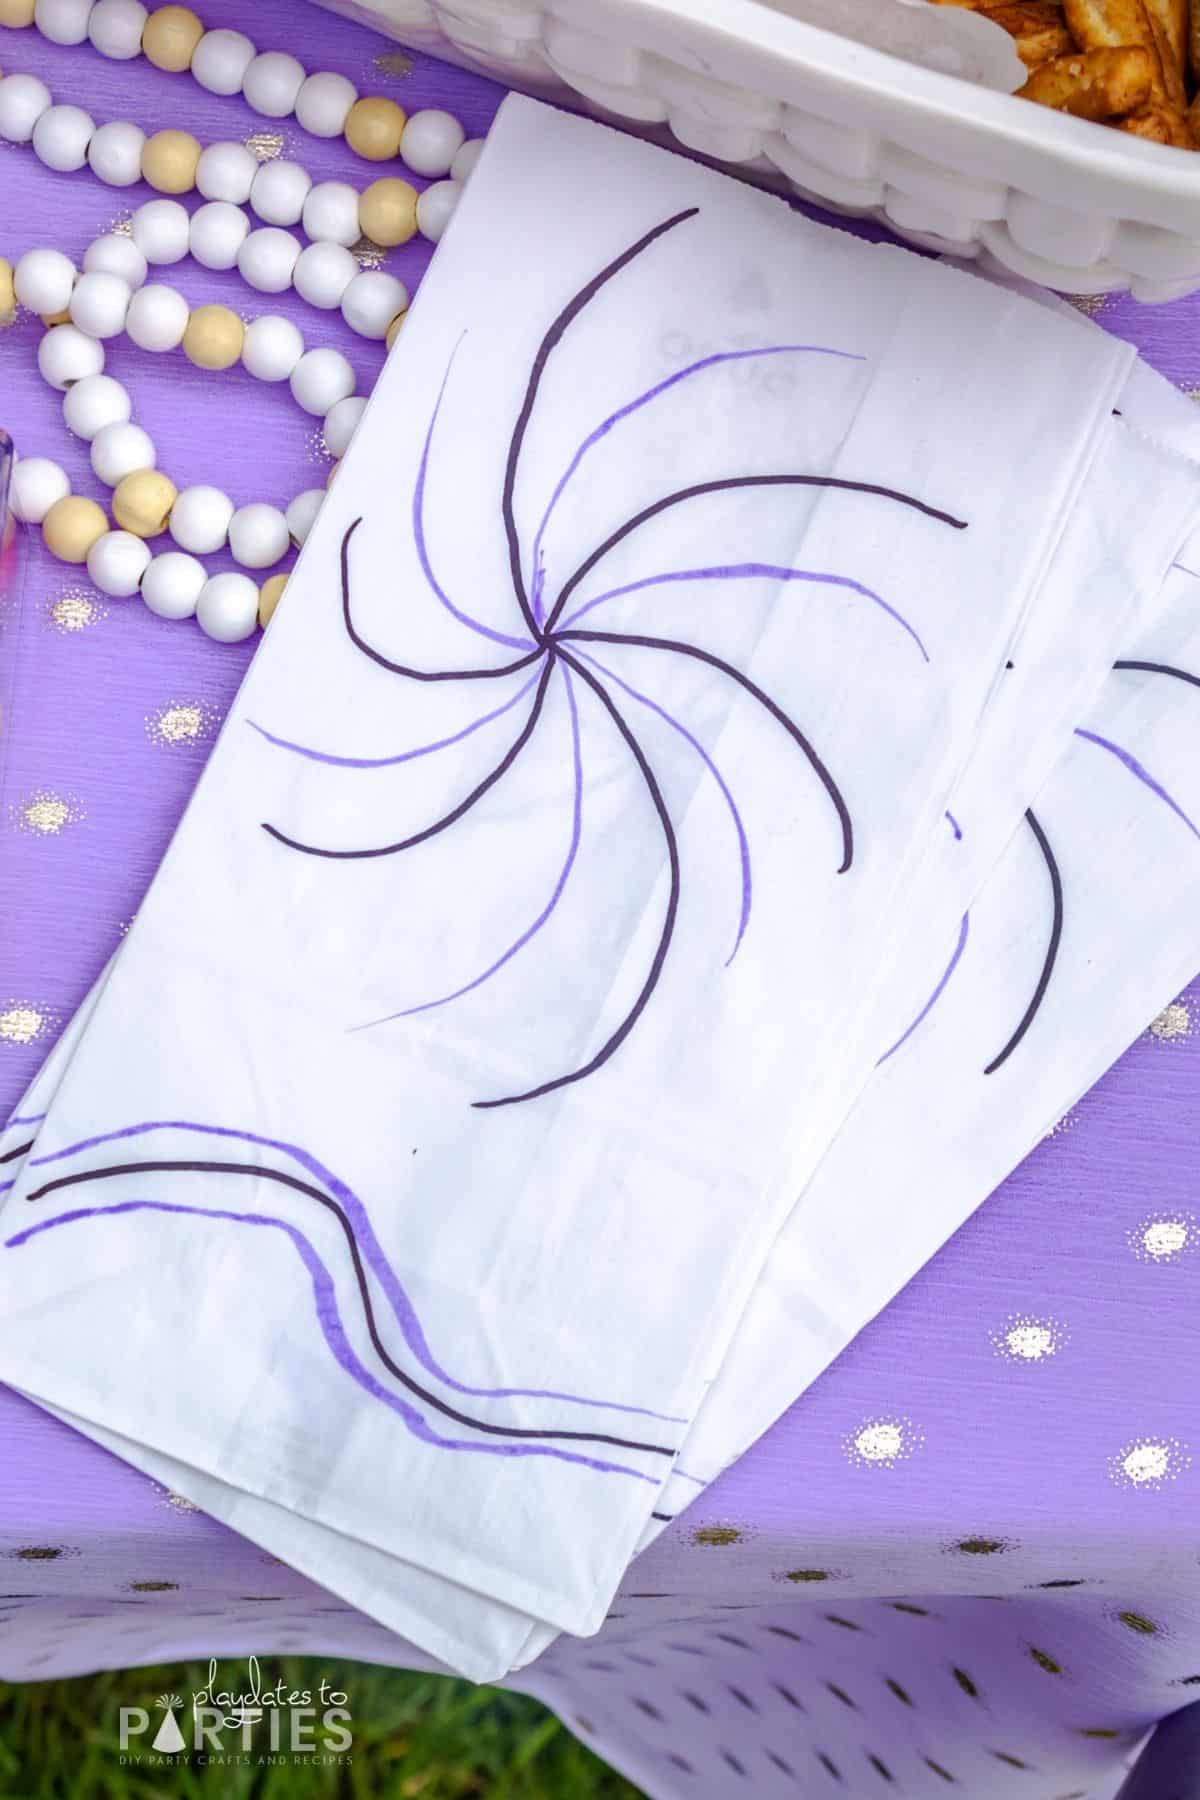 close up of white paper bags hand decorated with black and purple swirls